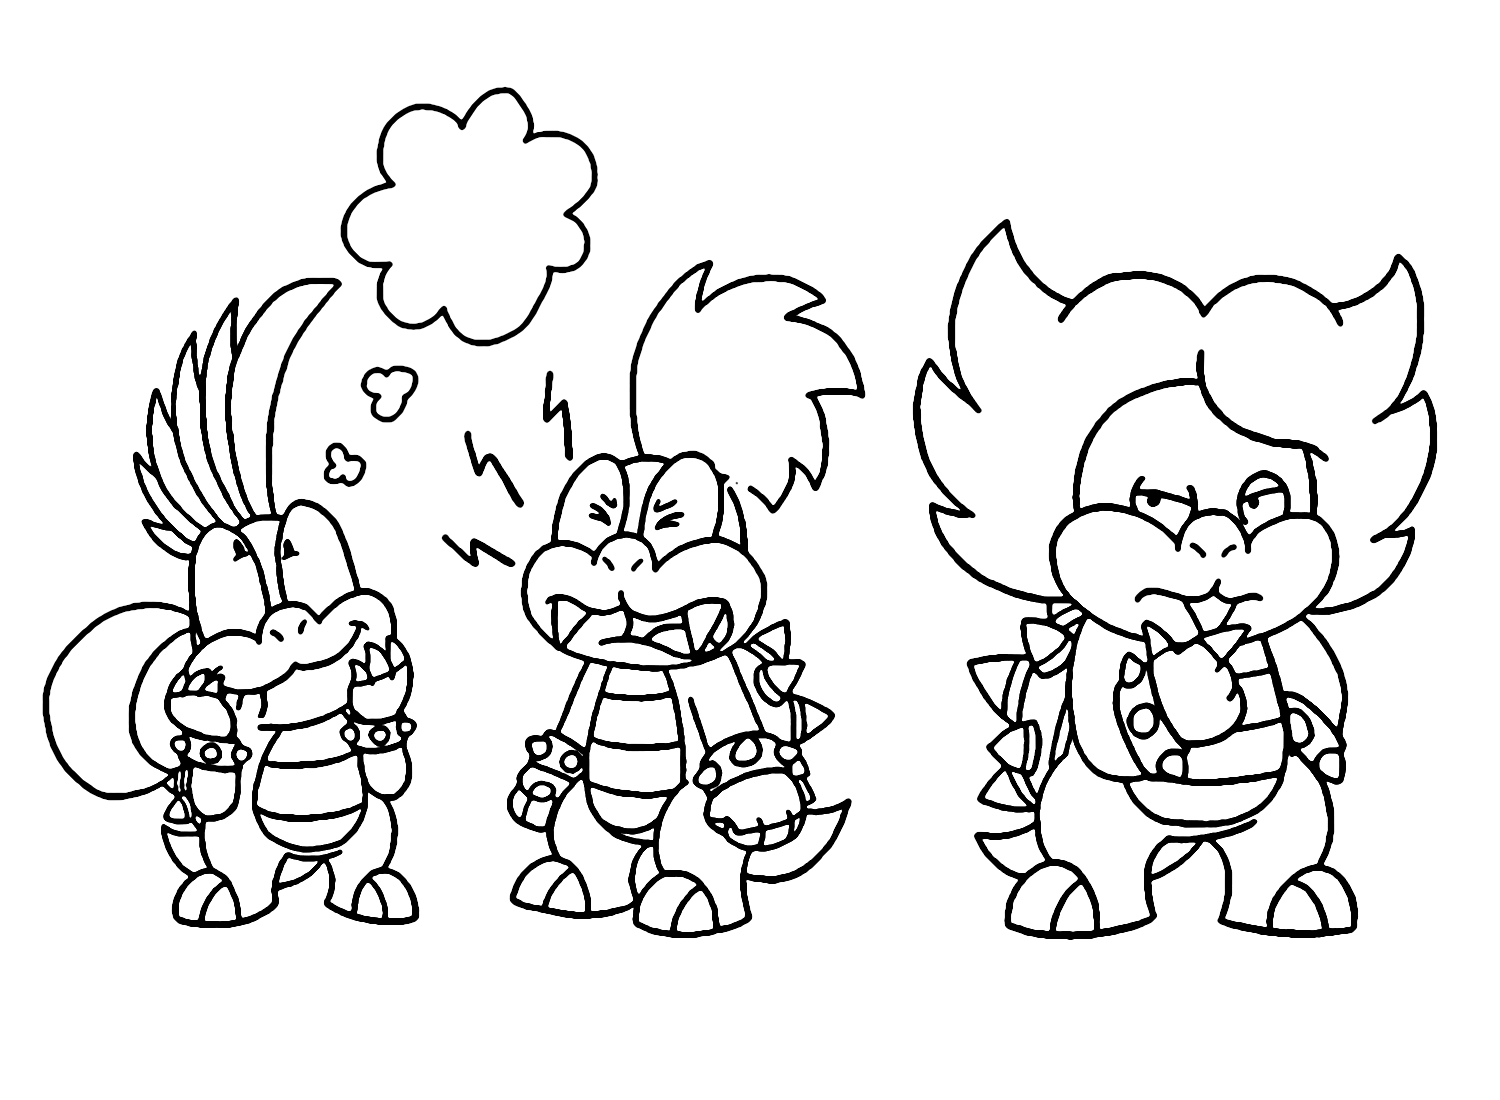 Koopalings from Super Mario Coloring Pages